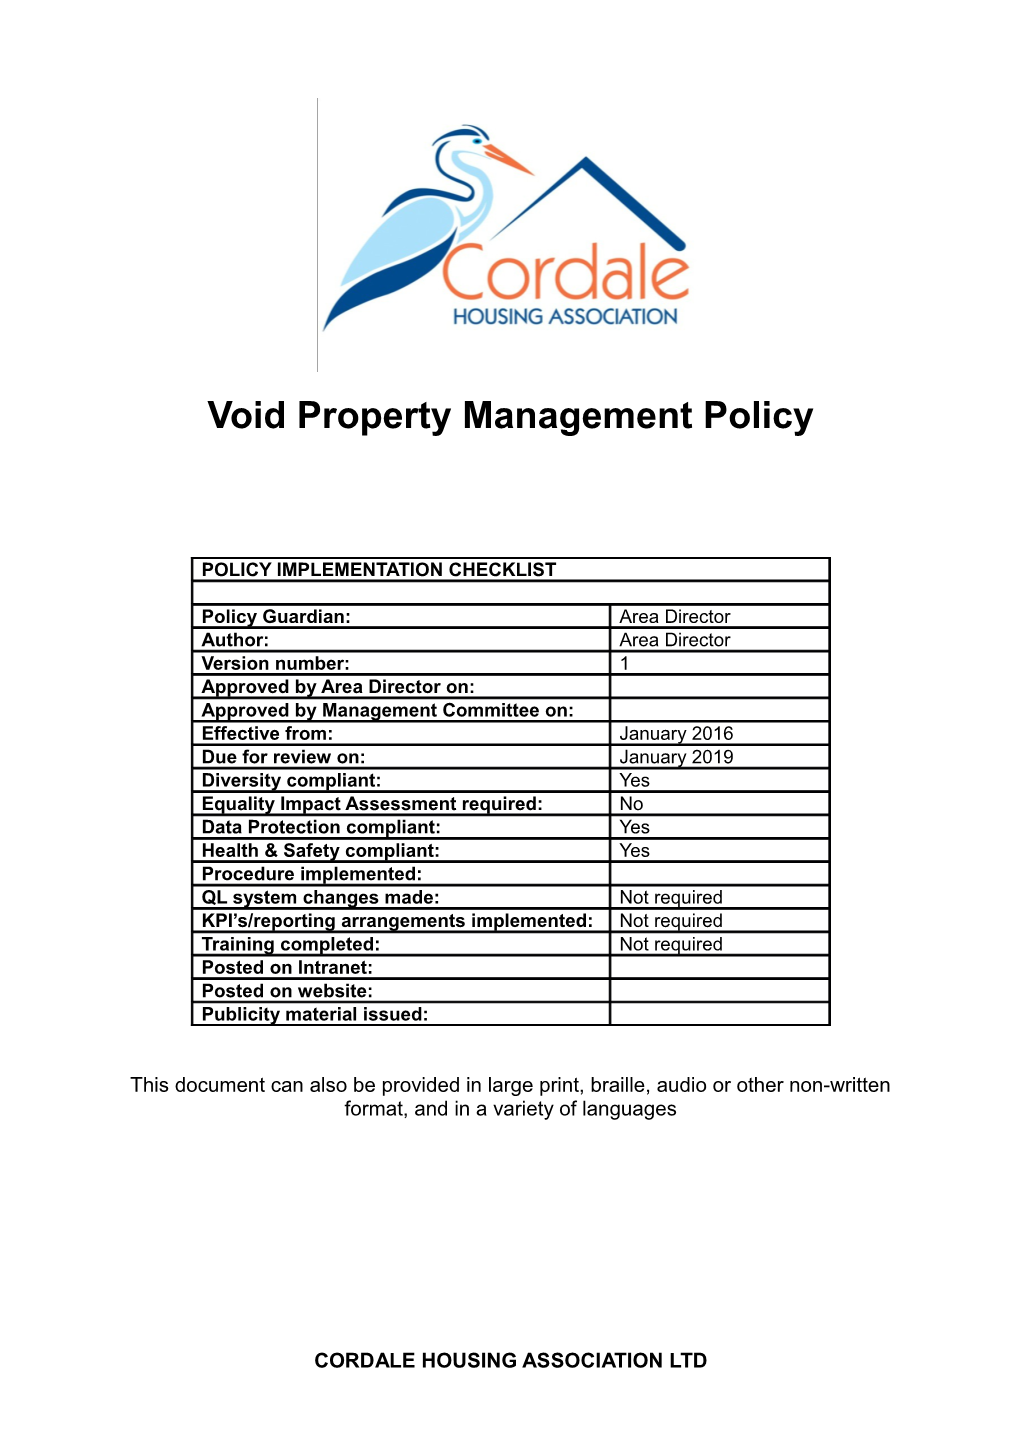 Void Property Management Policy